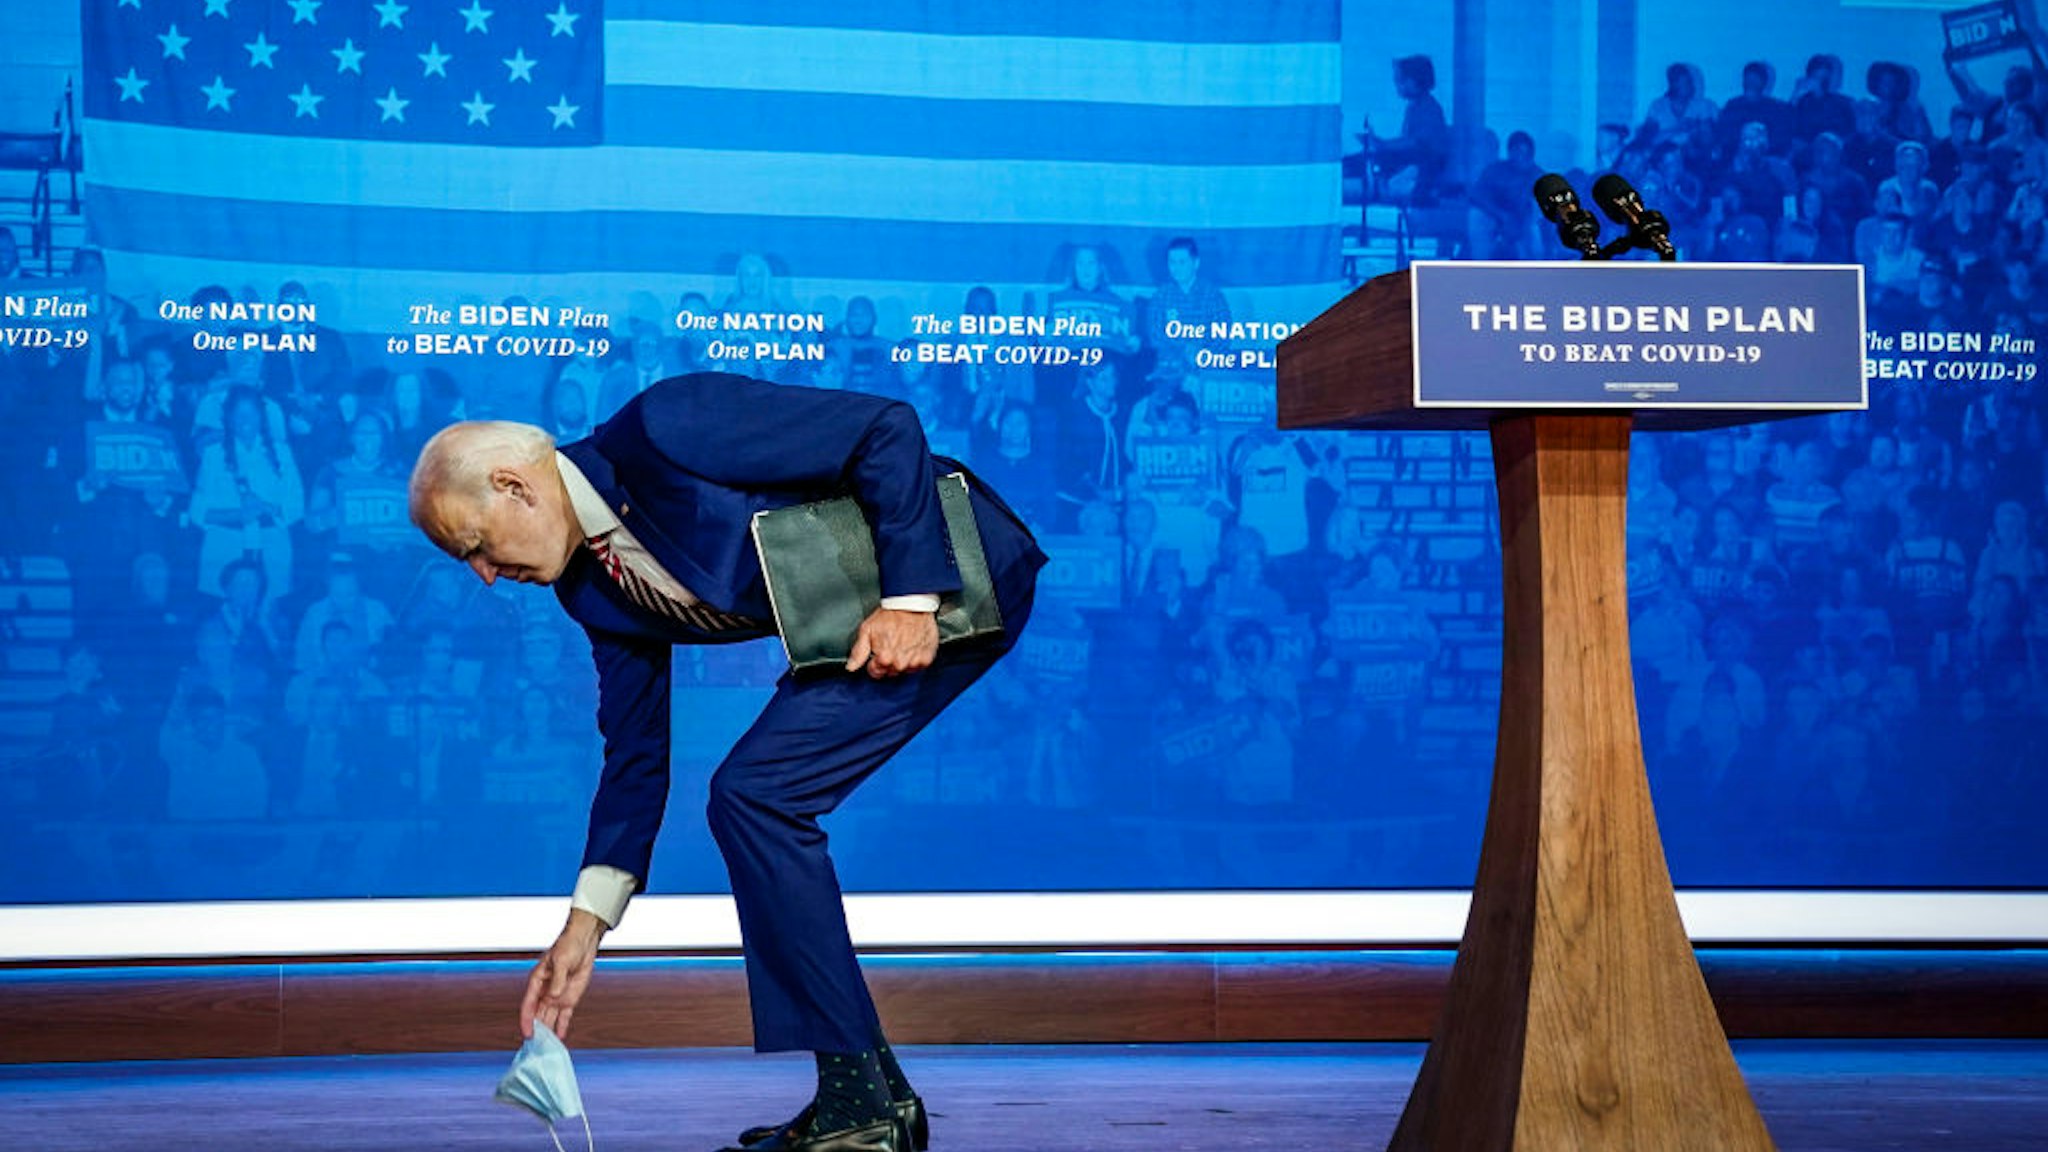 Democratic presidential nominee Joe Biden picks up his protective face mask after he dropped it while leaving the stage following his remarks for combatting the coronavirus pandemic at The Queen theater on October 23, 2020 in Wilmington, Delaware.